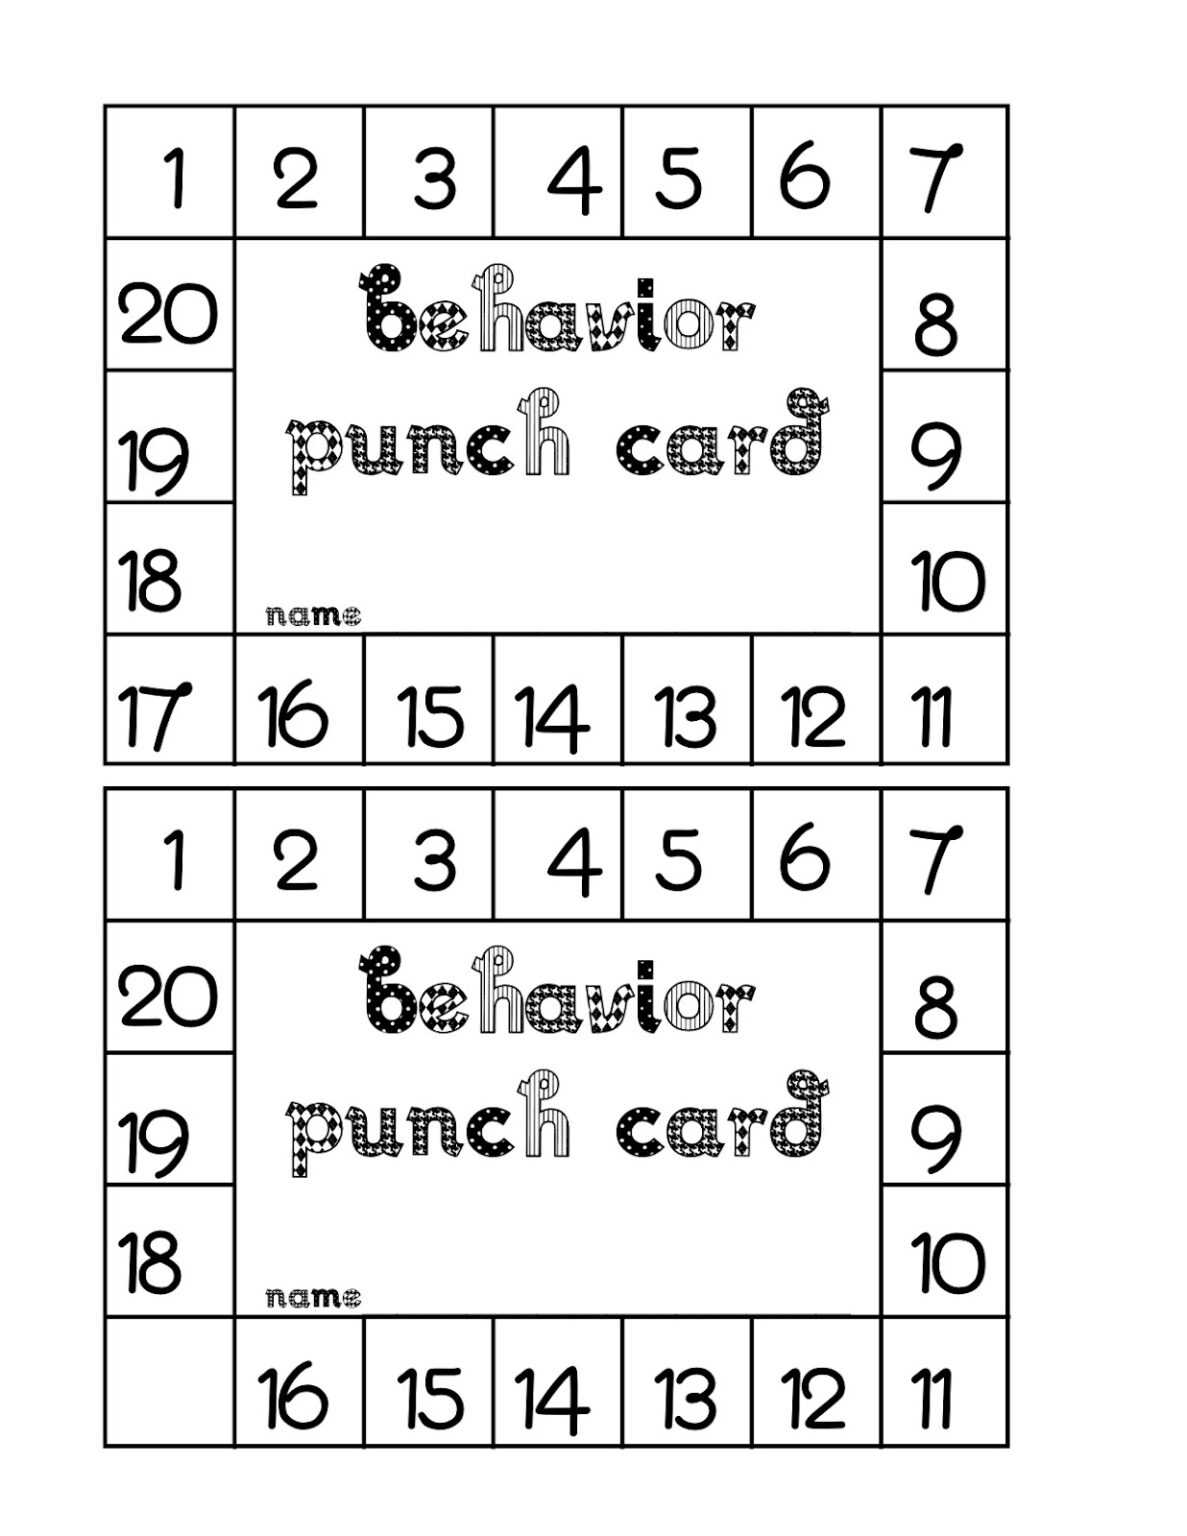 microsoft word templates punch card